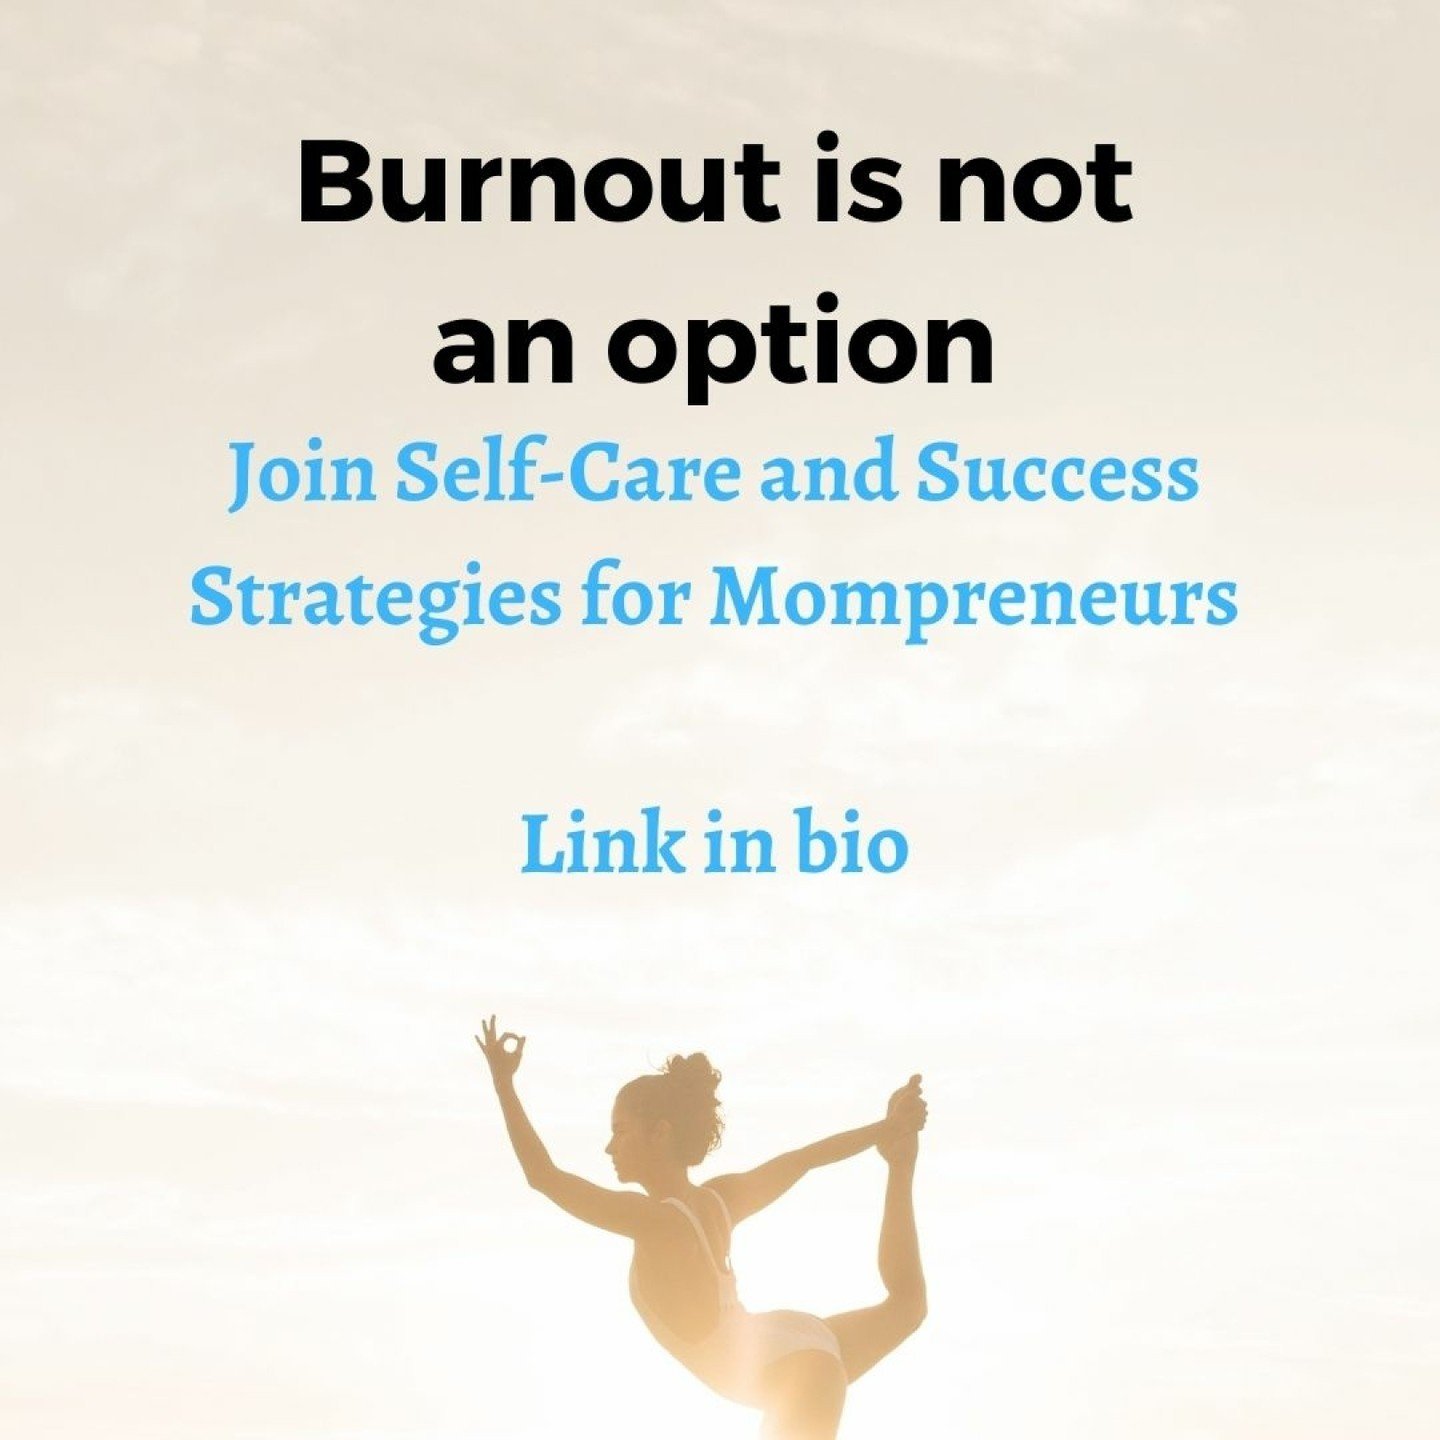 Calling all Mompreneurs: Burnout is not an option! 

It's more than a place to &quot;put your feet up &quot; and know that you've got the support of people who get what you're going through. 

You'll also learn practical steps to recognize and preven